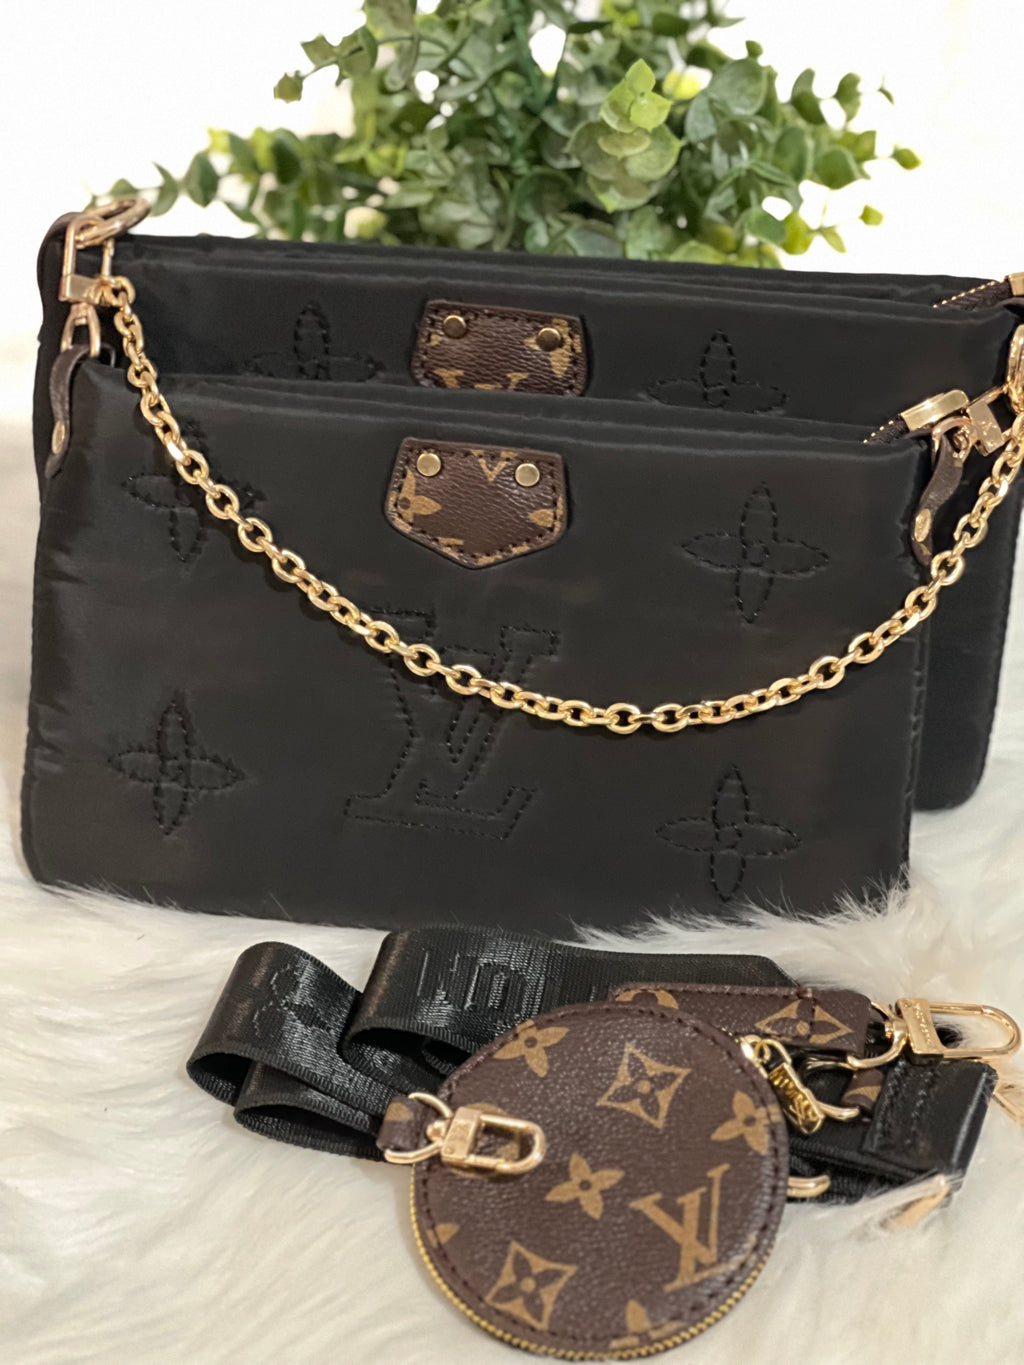 LV 2pc crossbody with pouch